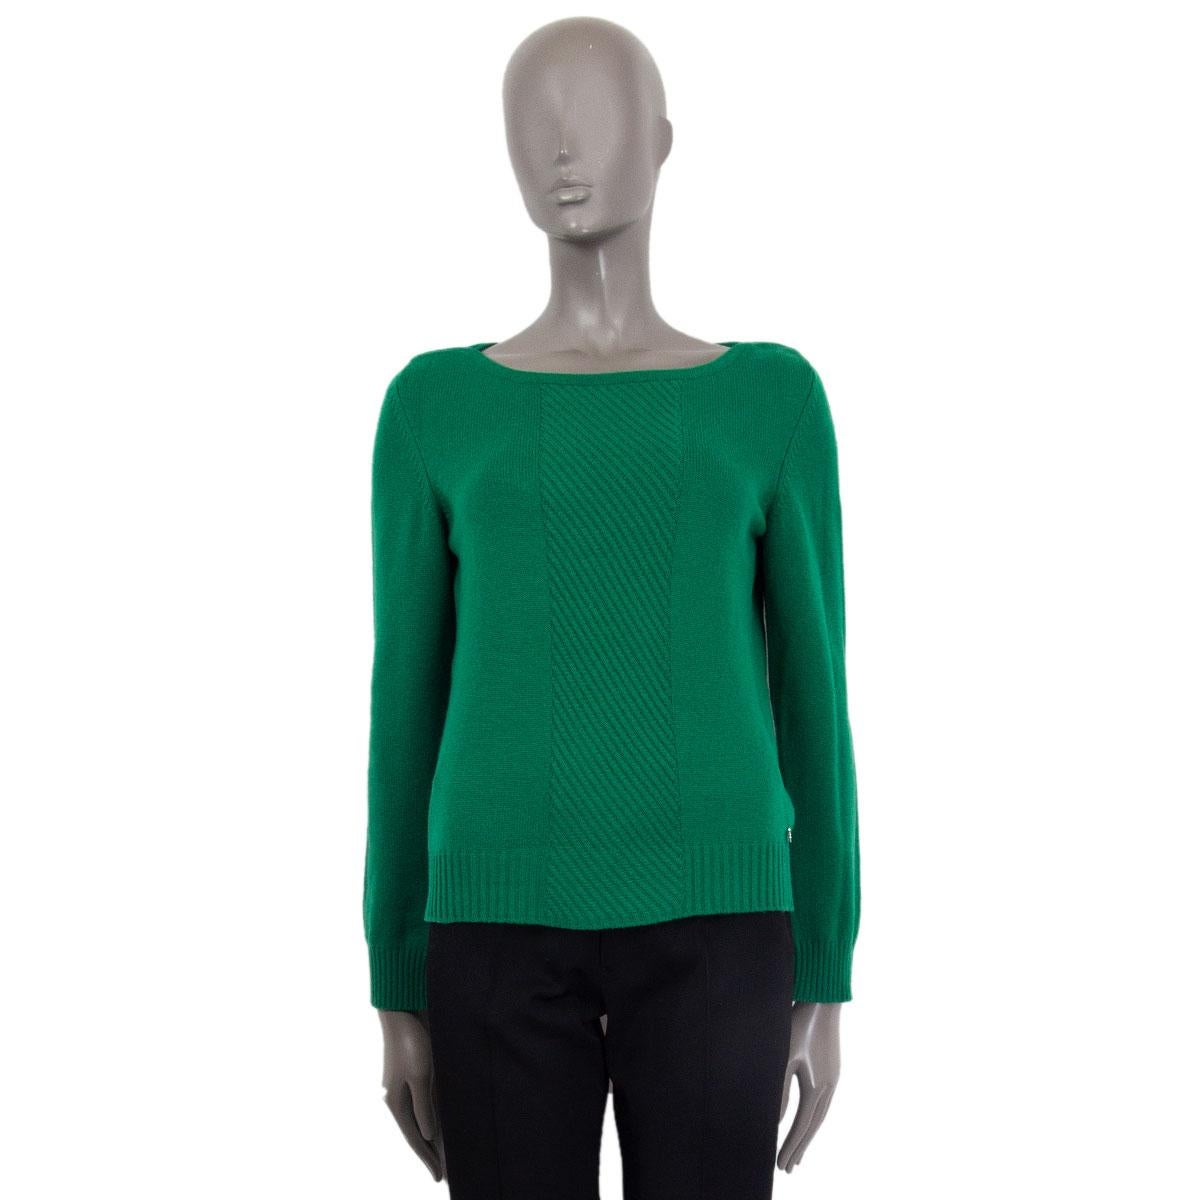 Hermès wide round-neck sweater in emerald green cashmere (100%). Ribbed detail in the middle. Has been worn and are in excellent condition. 

Tag Size 40
Size M
Shoulder Width 39cm (15.2in)
Bust 100cm (39in)
Waist 94cm (36.7in)
Hips 100cm